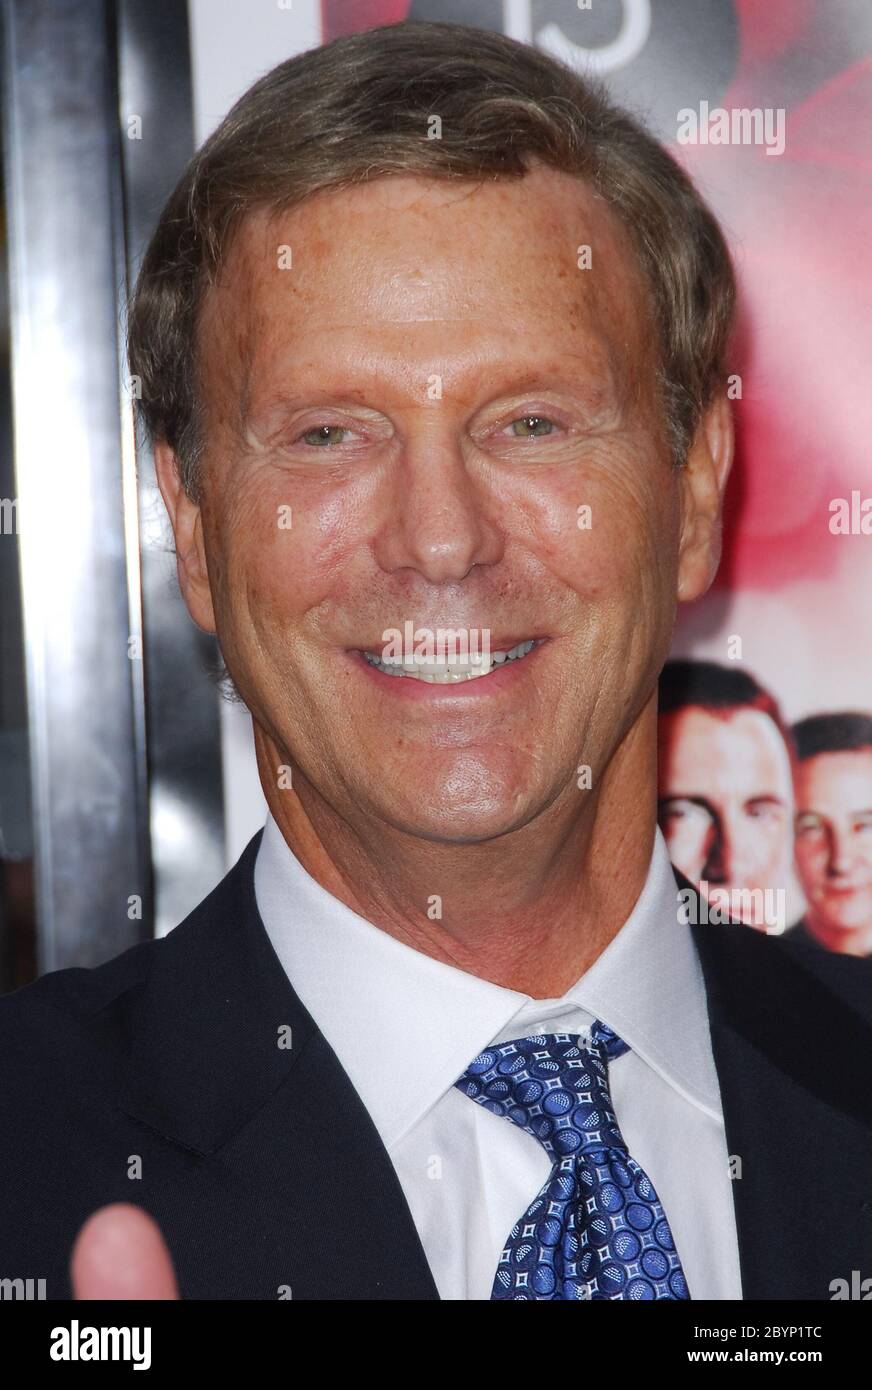 Super Dave Osborne at the Los Angeles Premiere of 'Ocean's Thirteen' held at the Mann Grauman's Chinese Theater in Hollywood, CA. The event took place on Tuesday, June 5, 2007. Photo by: SBM / PictureLux - File Reference # 34006-6378SBMPLX Stock Photo